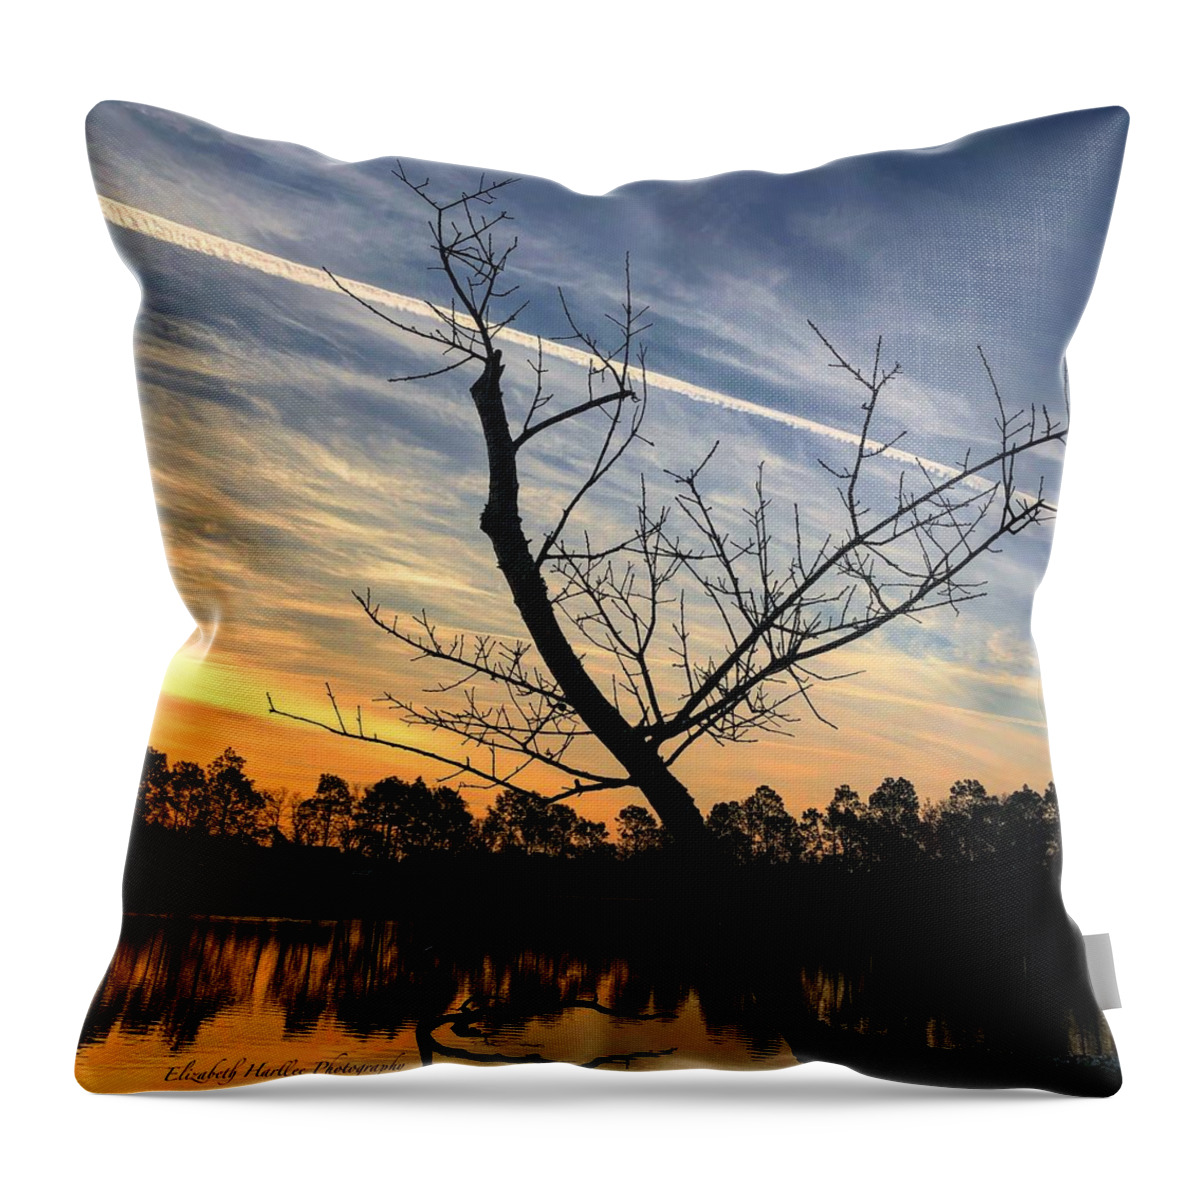 Sunrise Throw Pillow featuring the photograph Success by Elizabeth Harllee